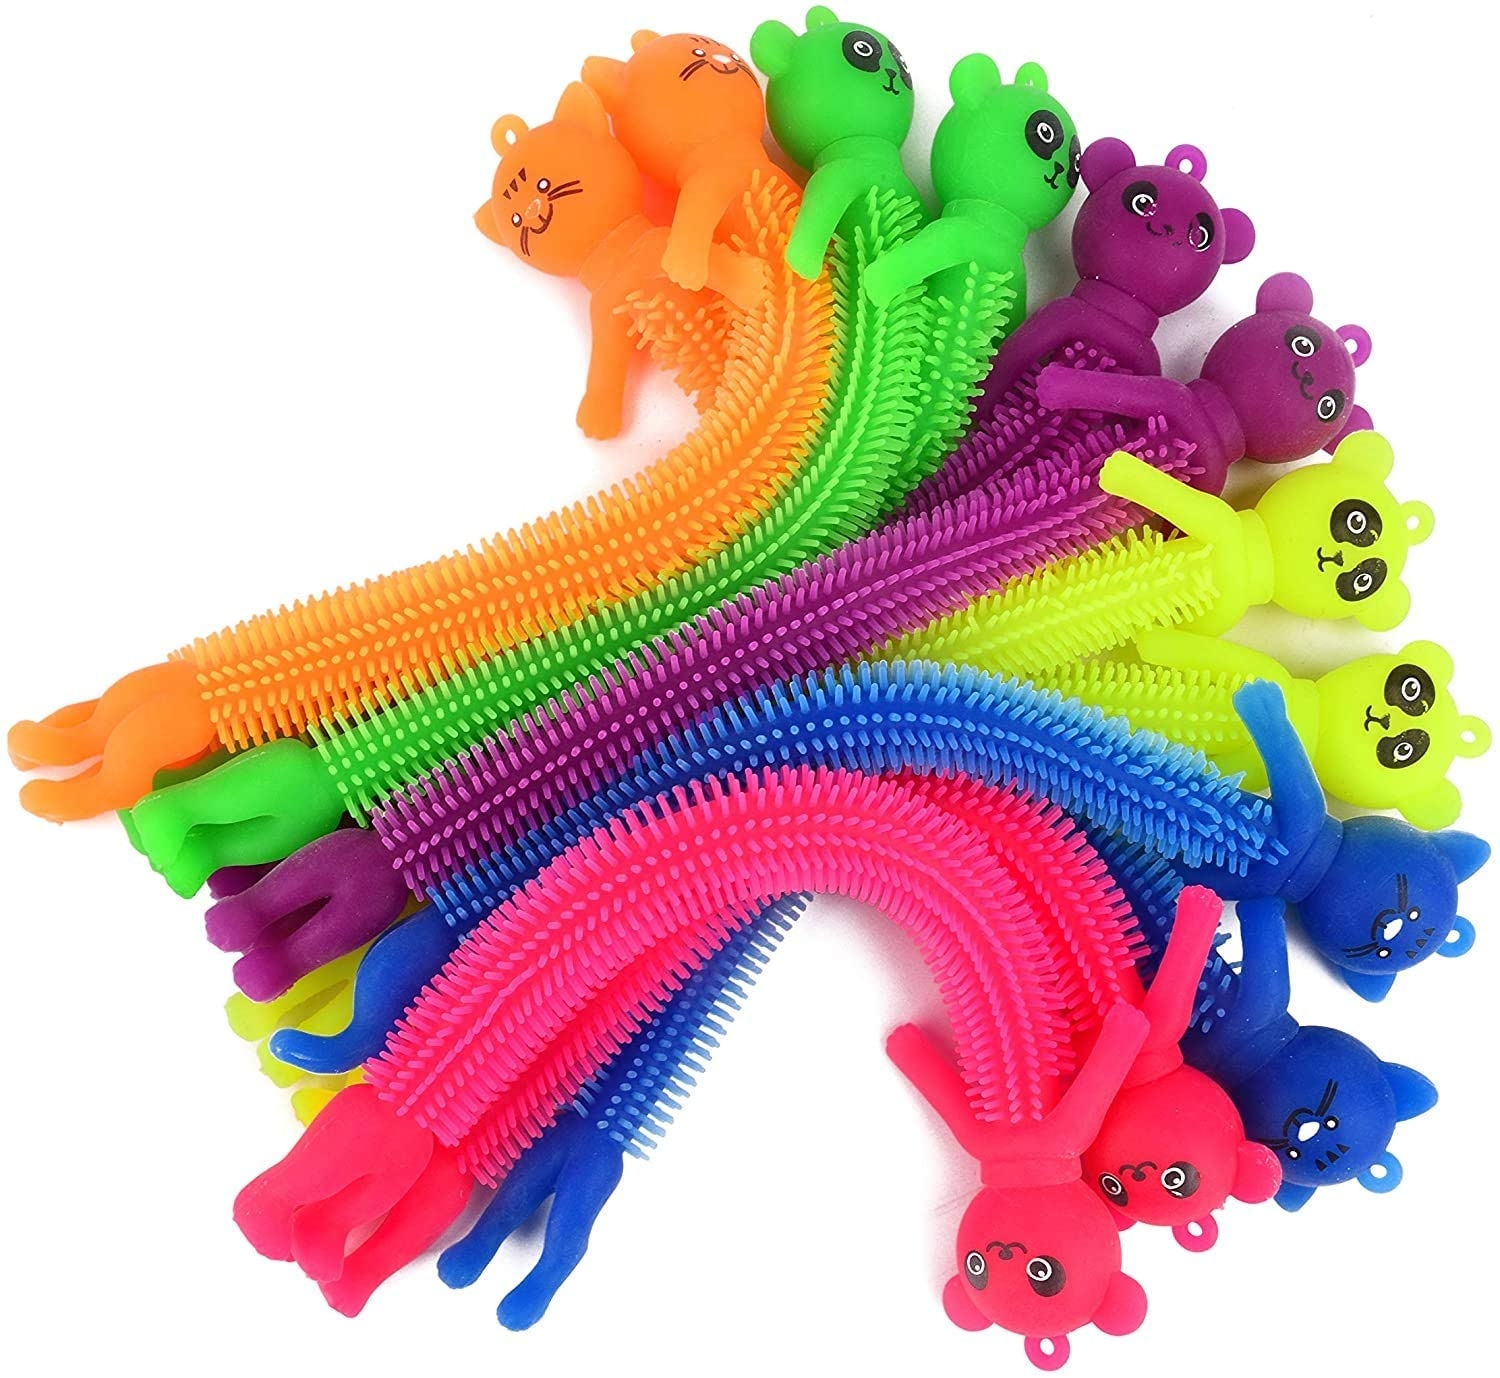 Tactile String Animals | 450+ Fun Products Under | Tactile Stretchy String Animals from Therapy Shoppe Stretchy String | Sensory, Quiet, Silent Fidget-Fiddle-Toy | Autism | Special